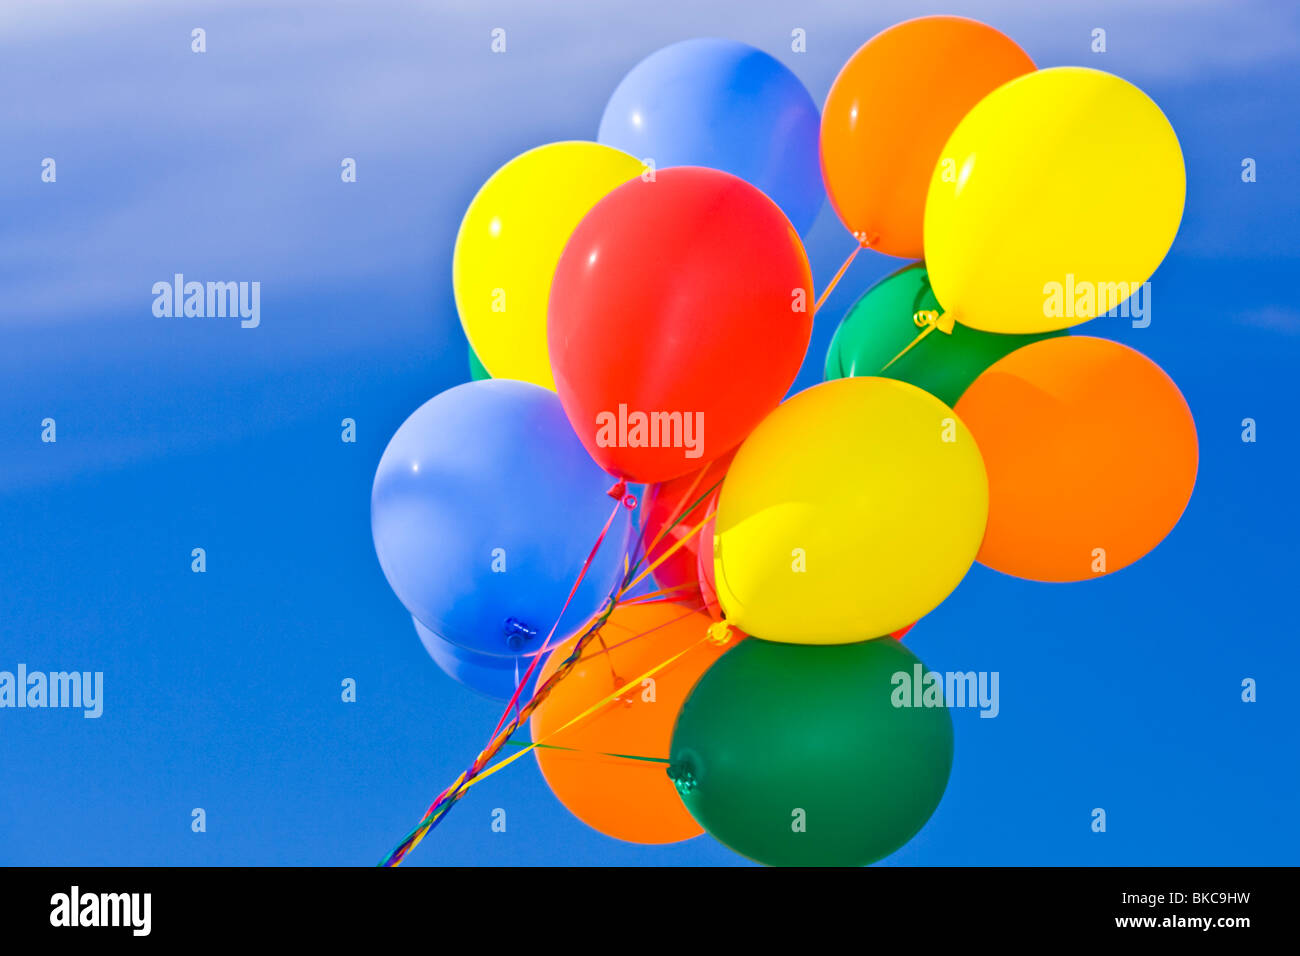 Colorful balloons against a blue sky Stock Photo